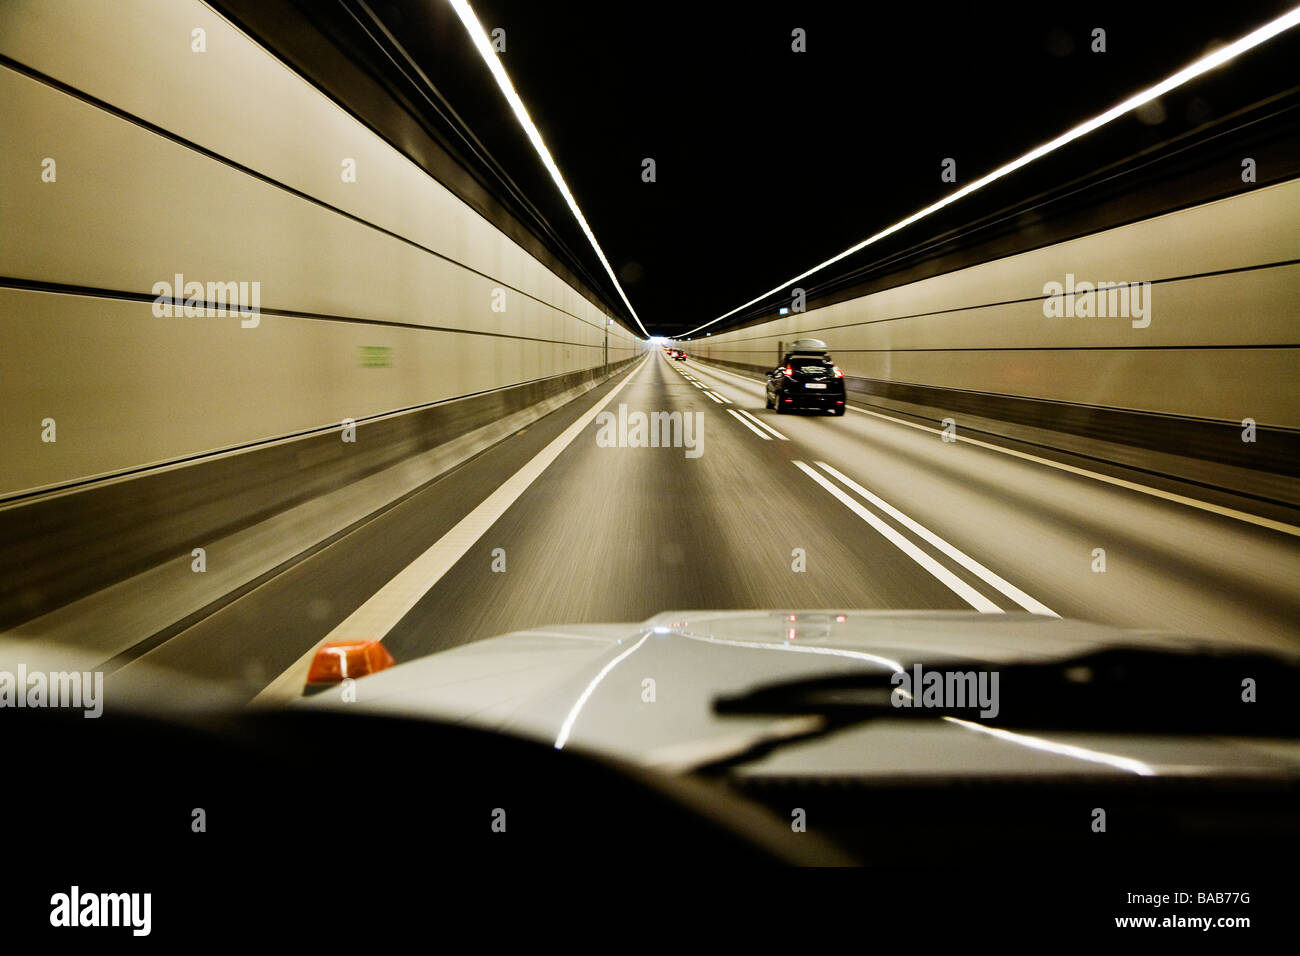 Cars In A Tunnel. Stock Photo